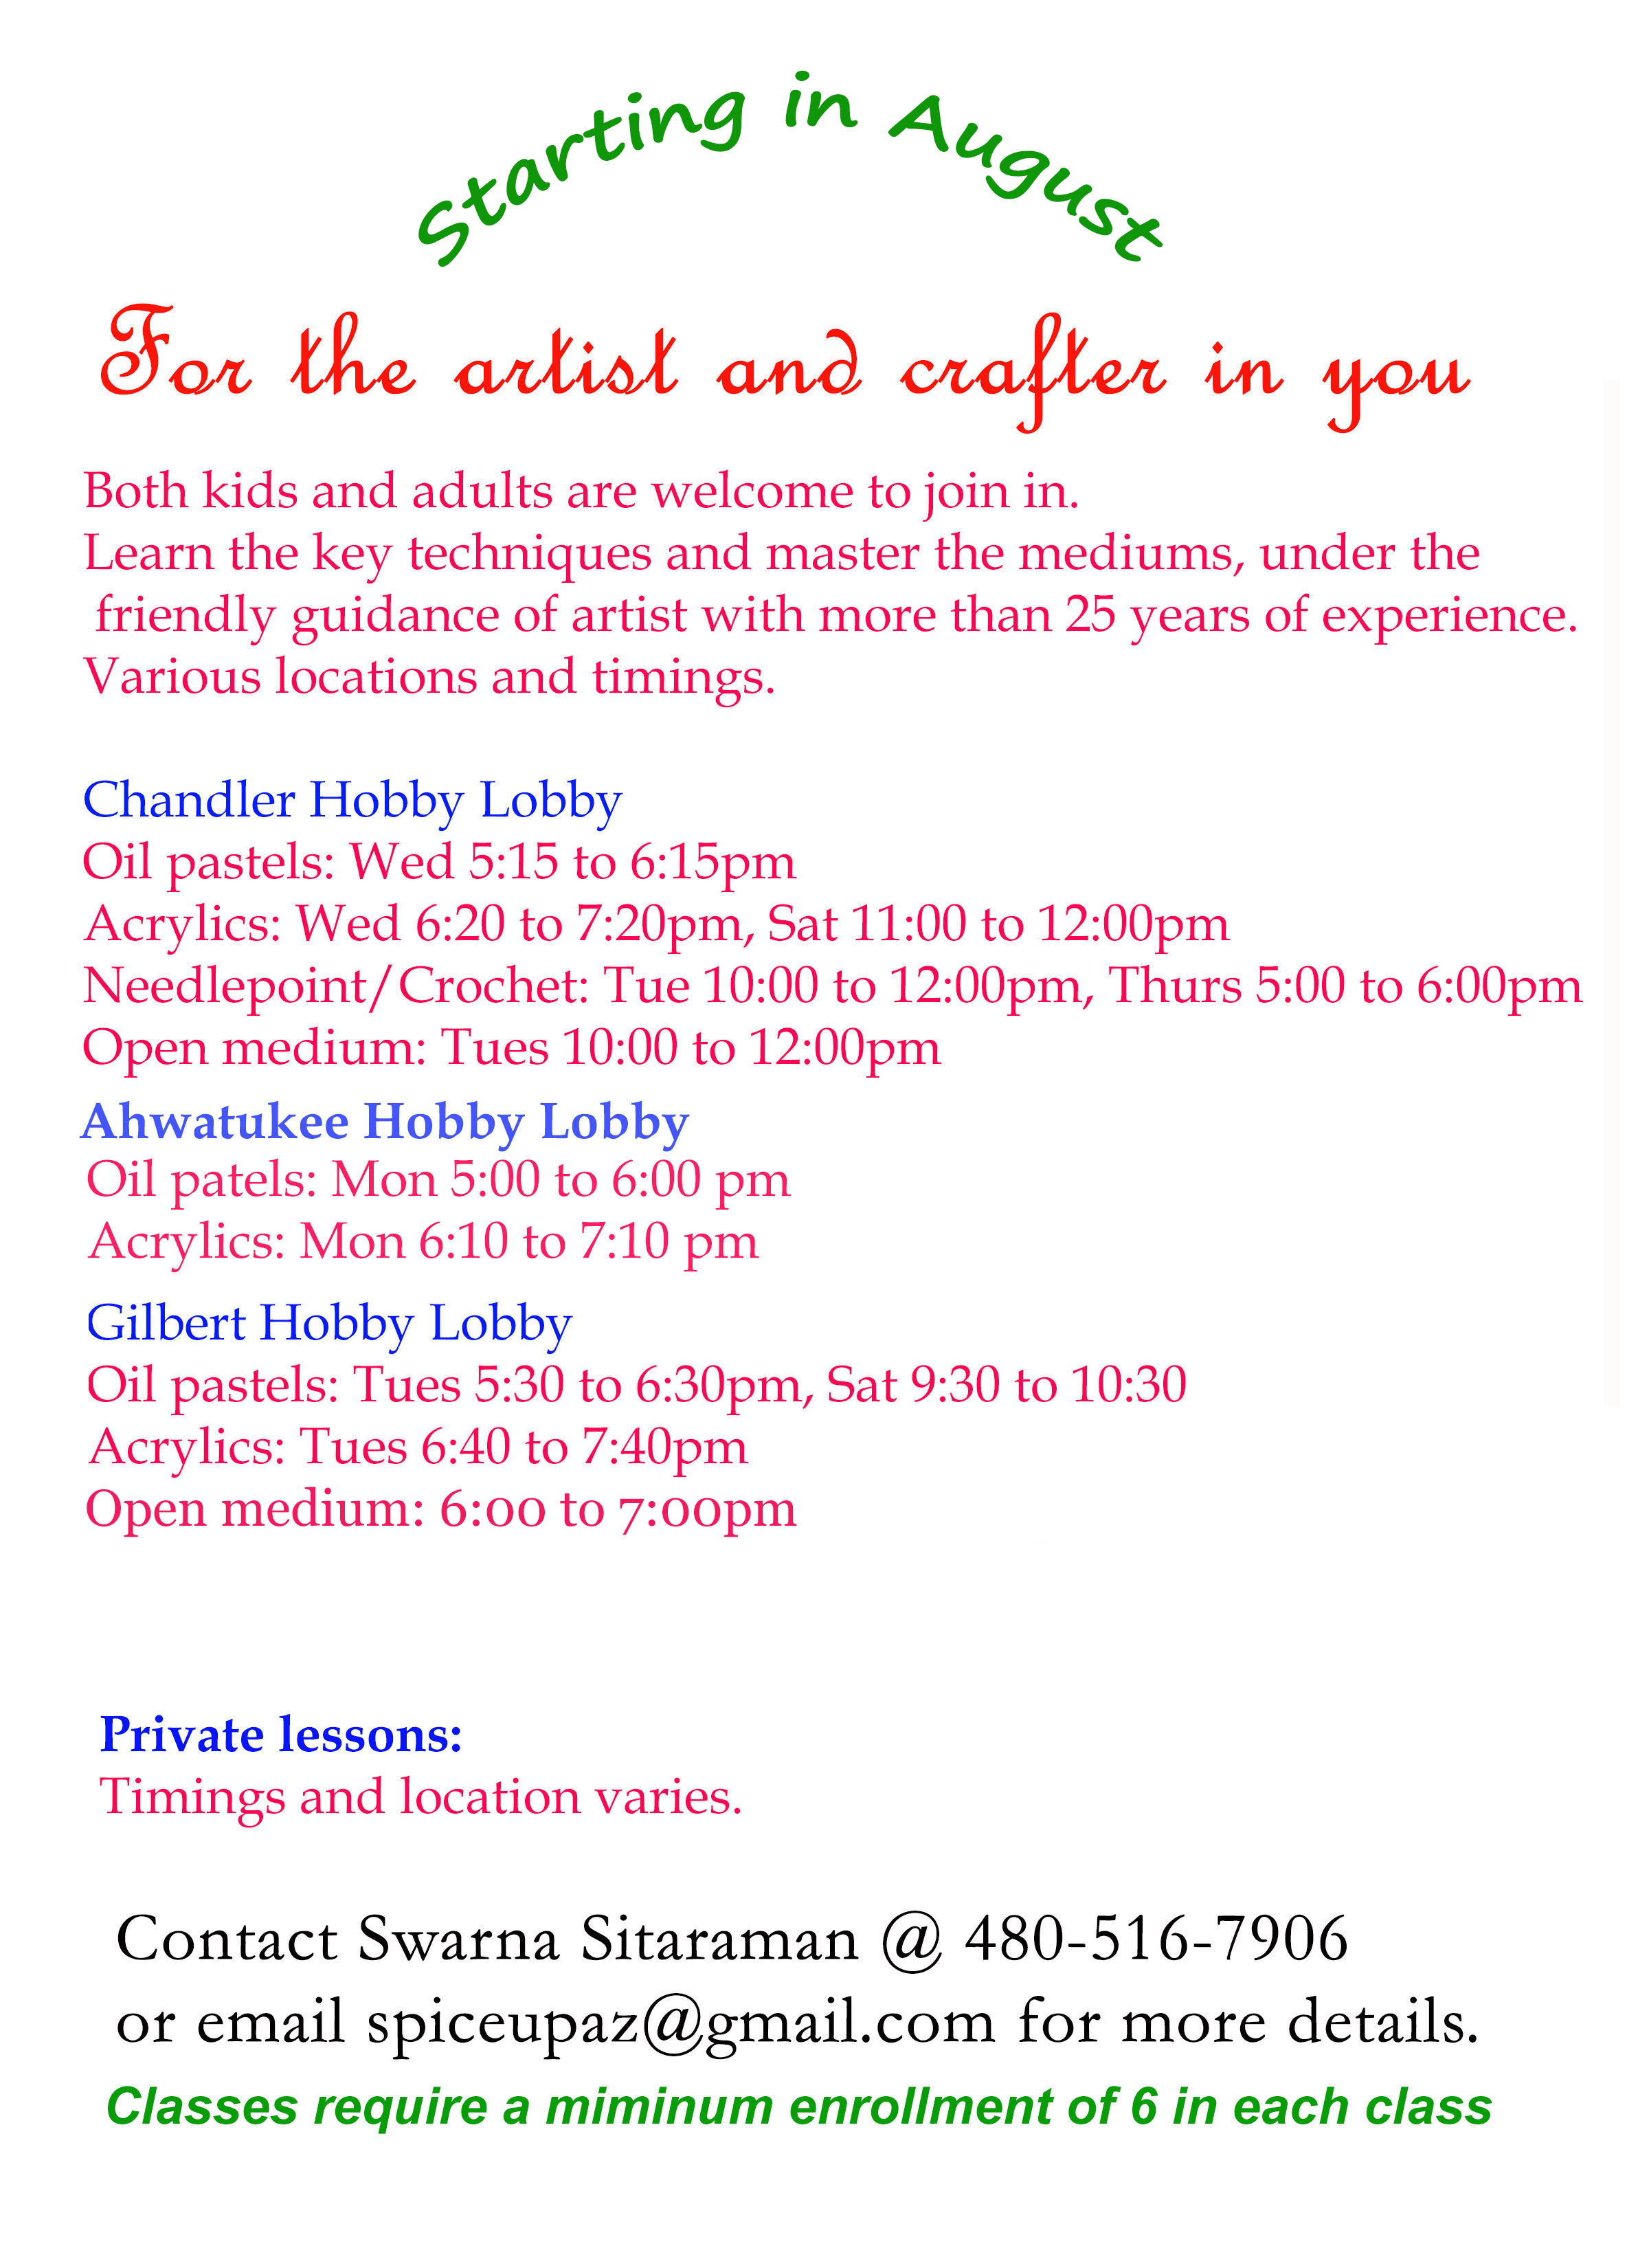 ART and CRAFT classes